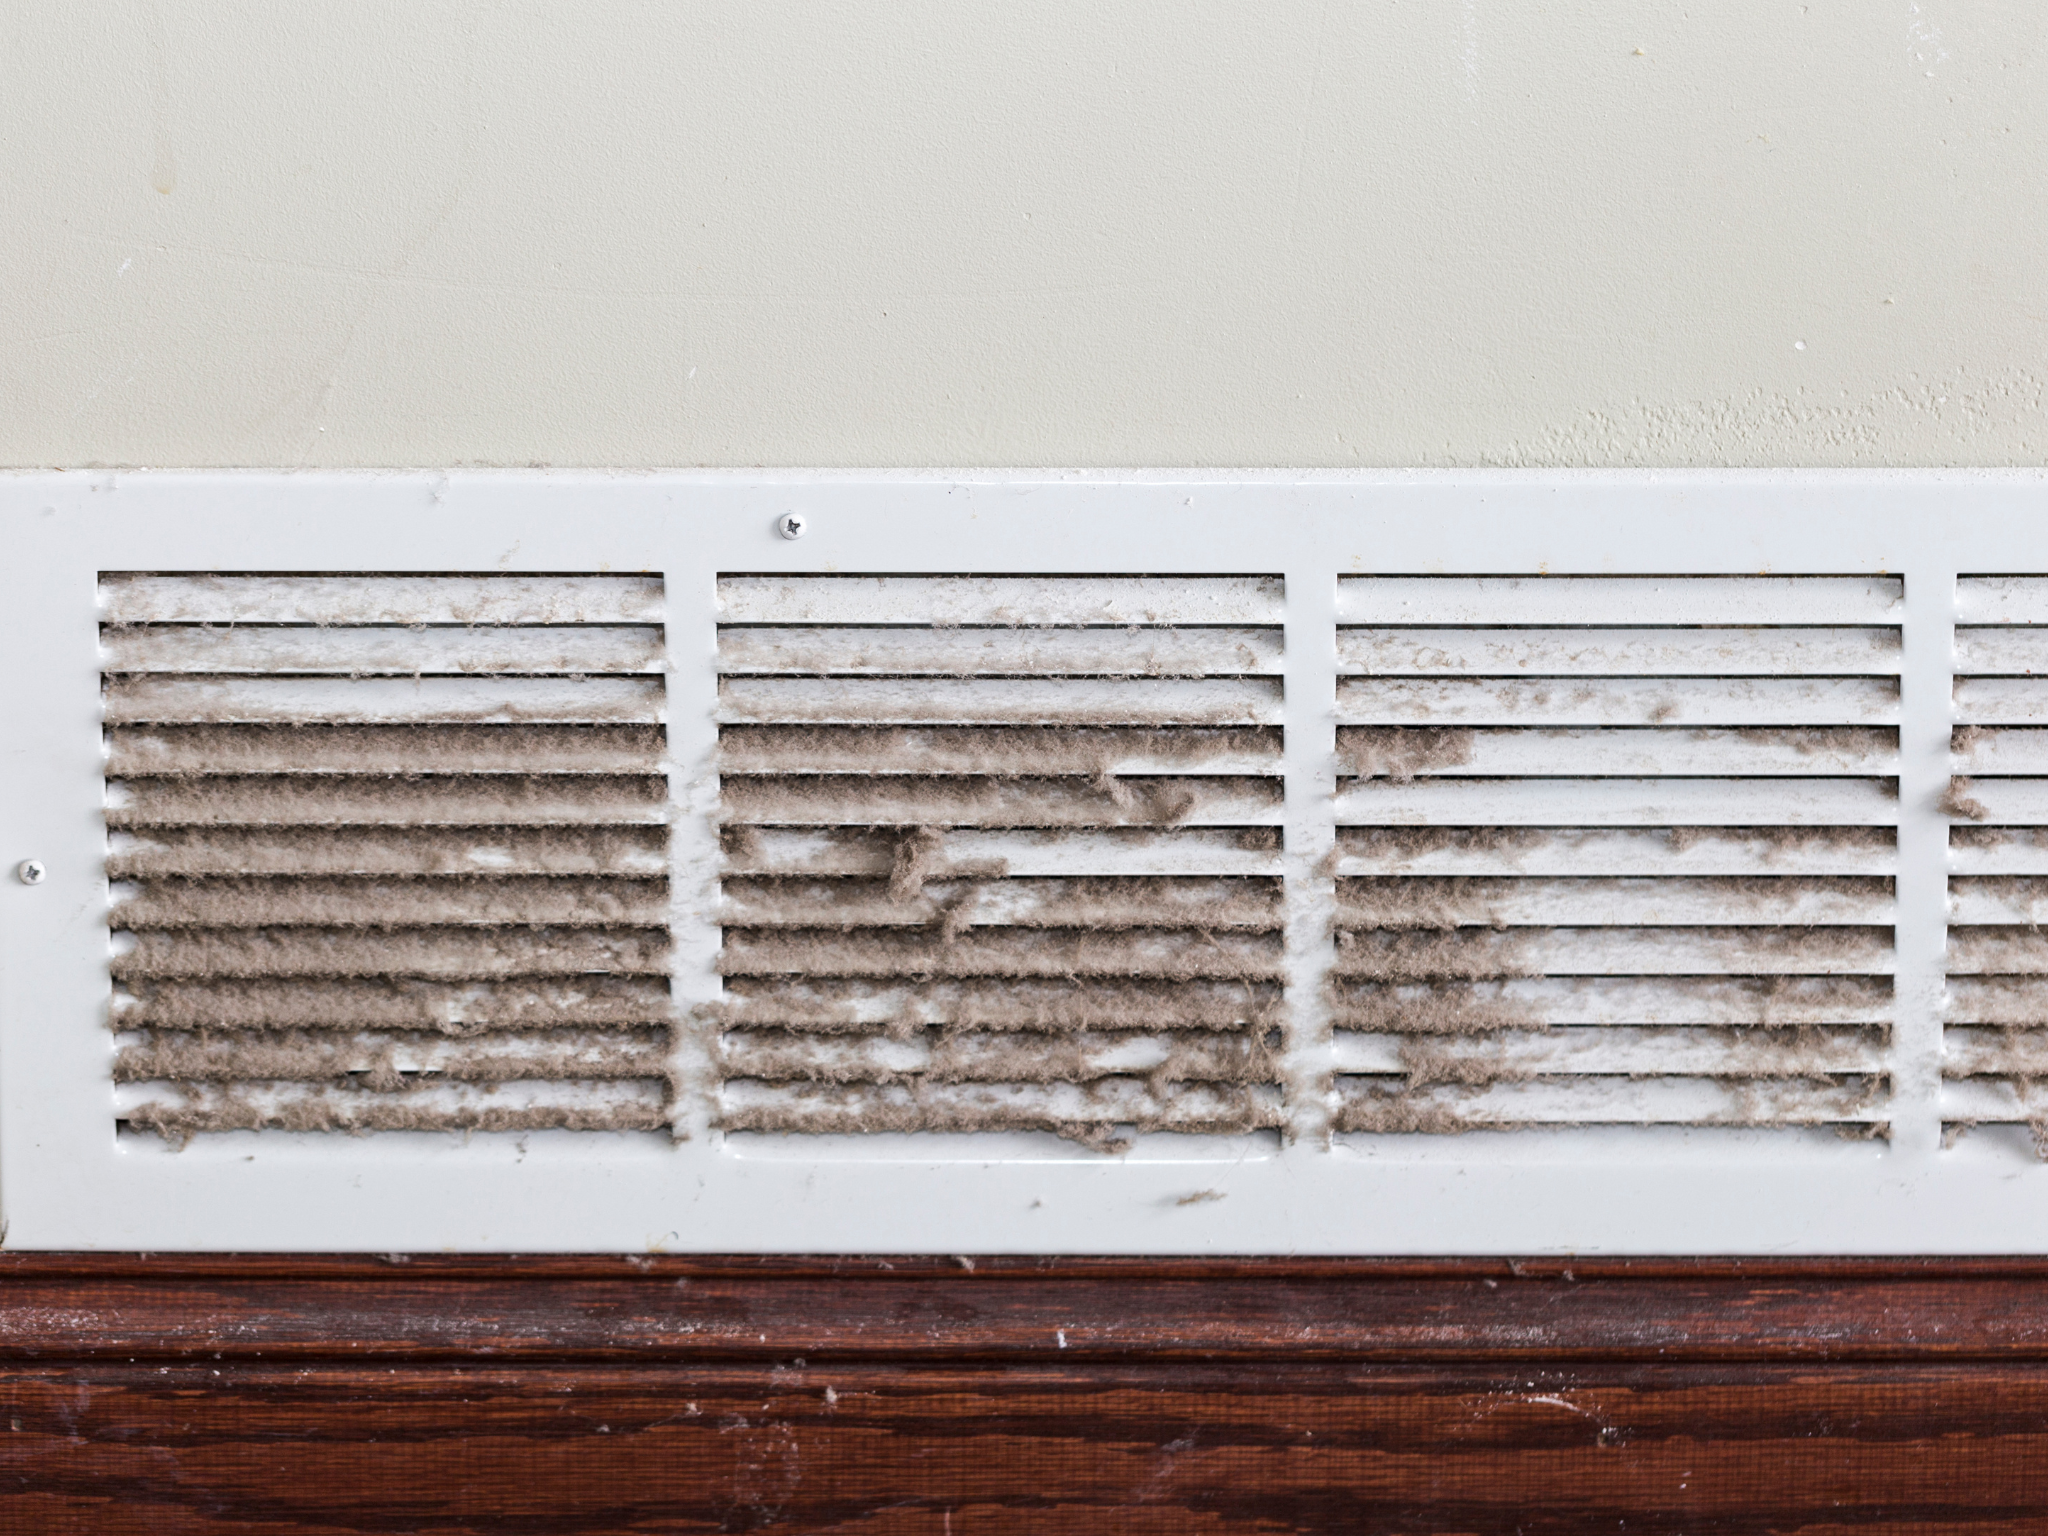 Improving Indoor Air Quality